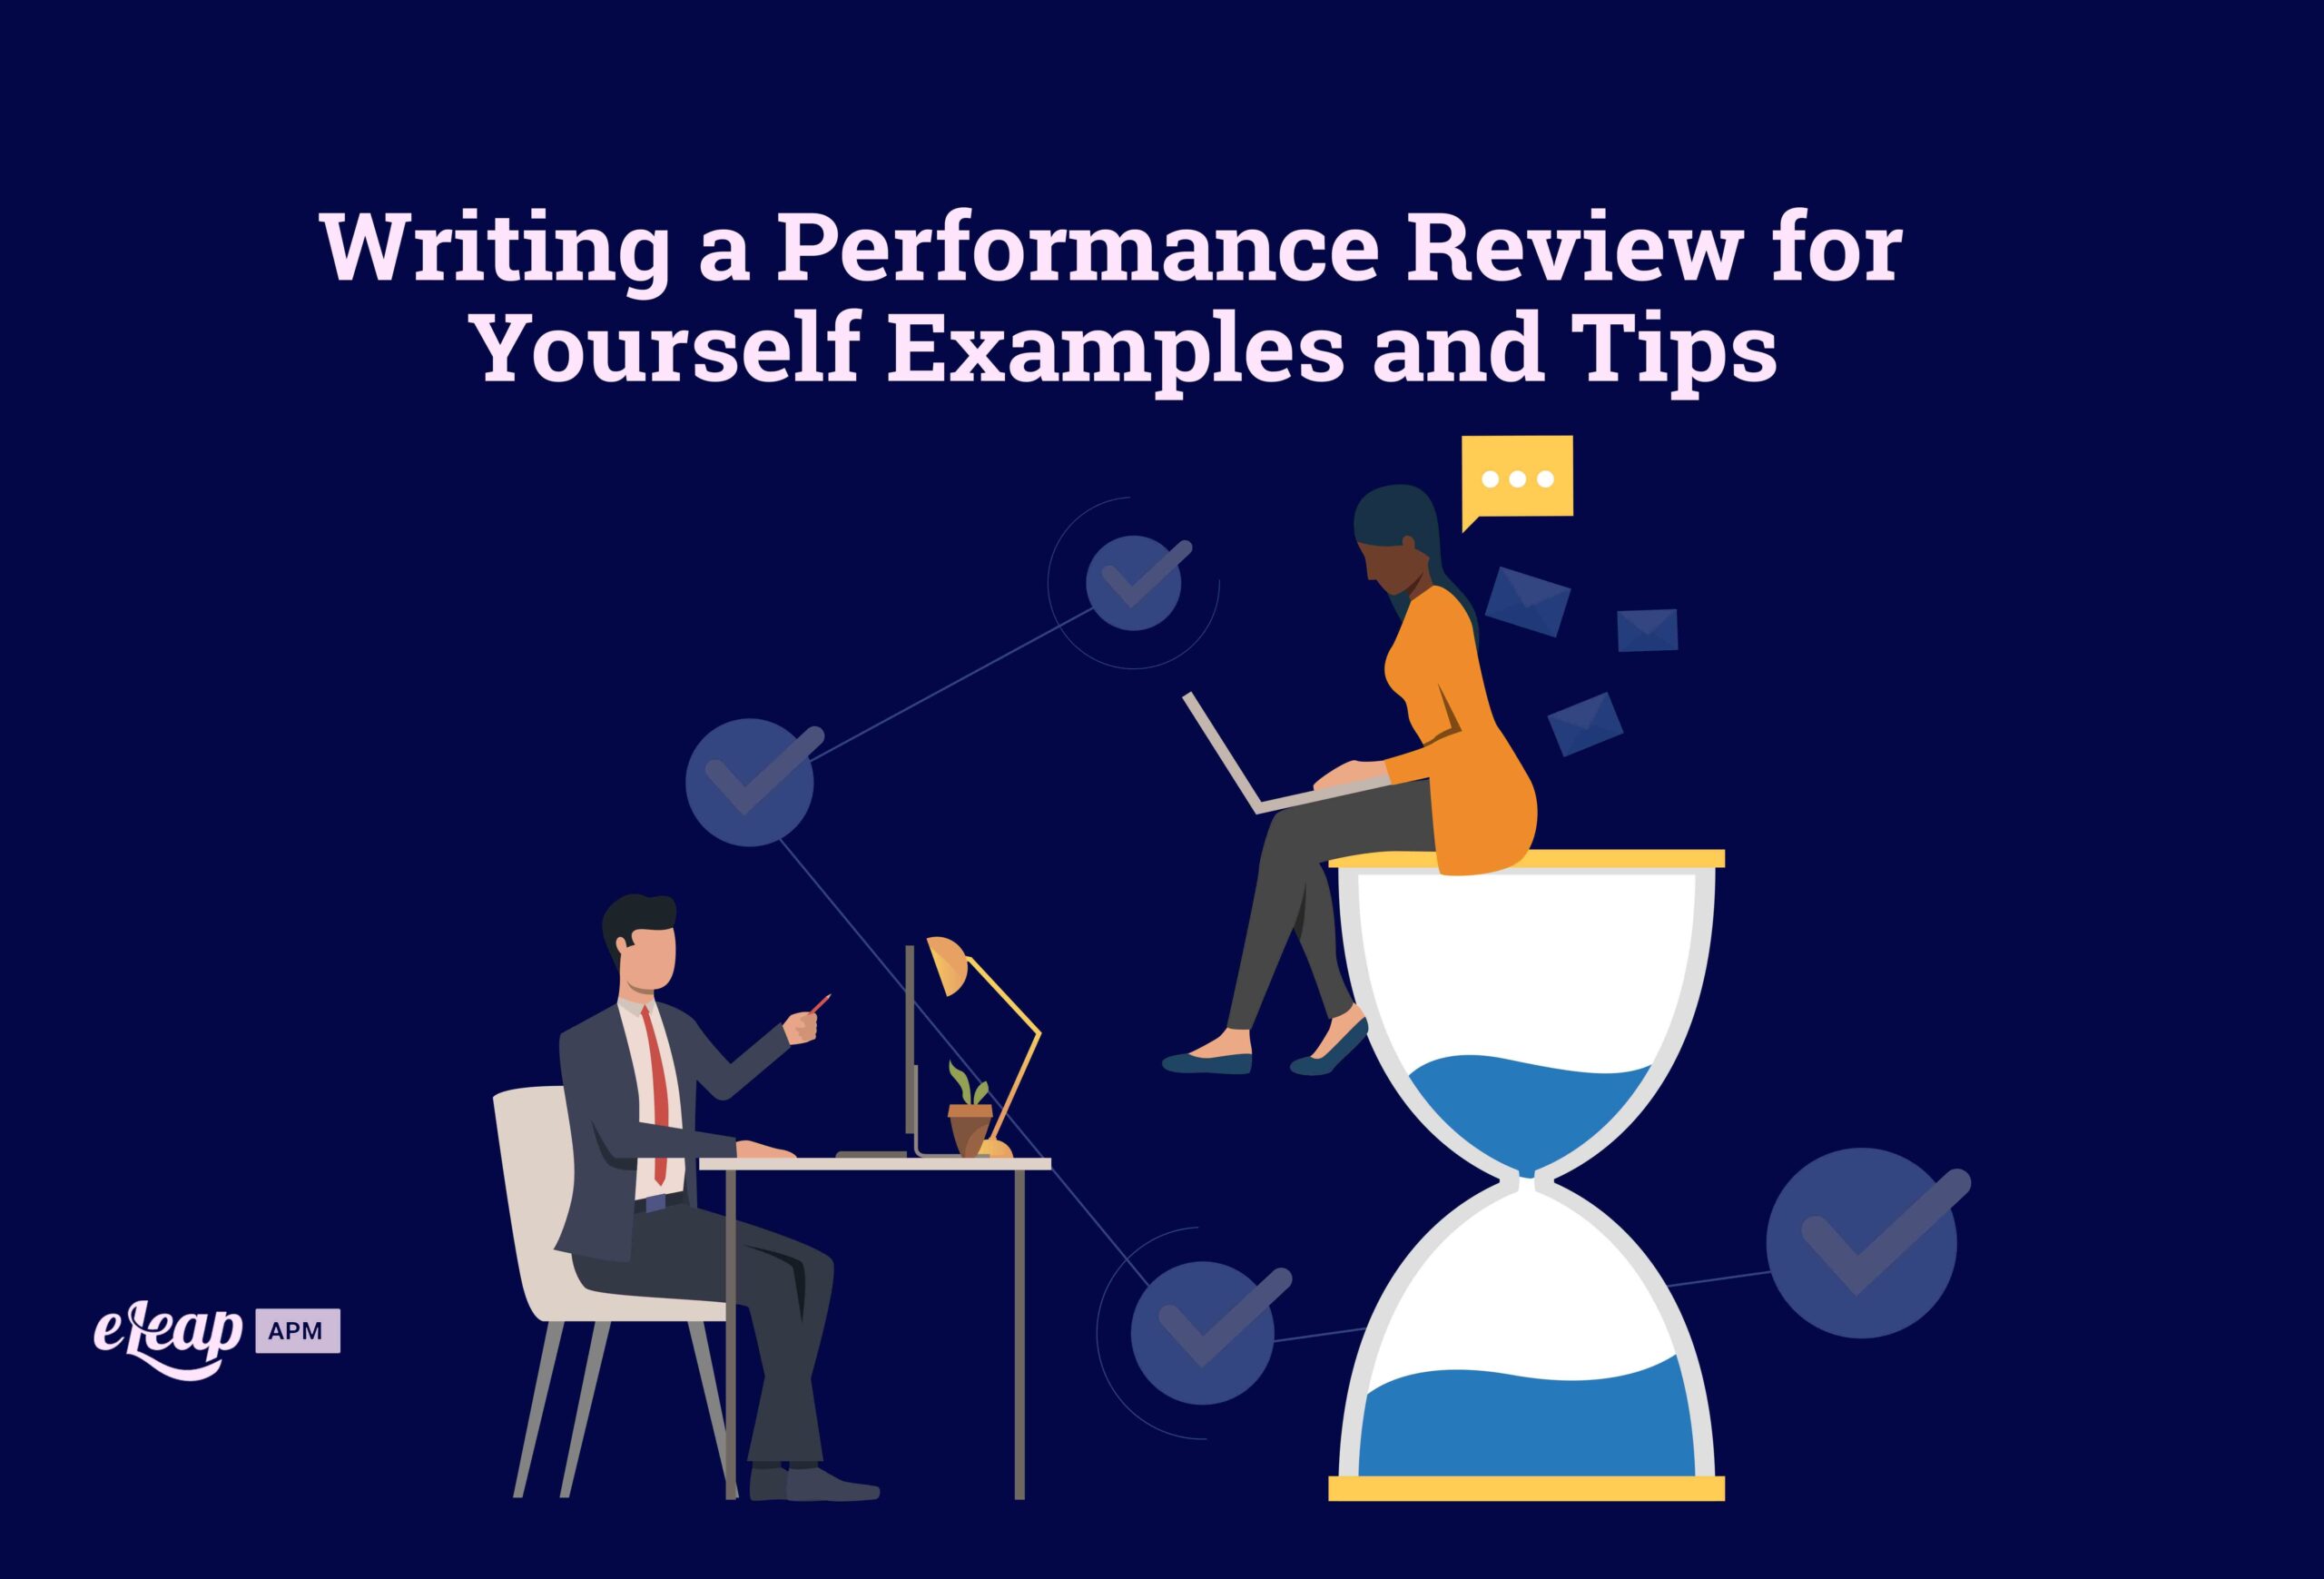 Writing a Performance Review for Yourself Examples and Tips